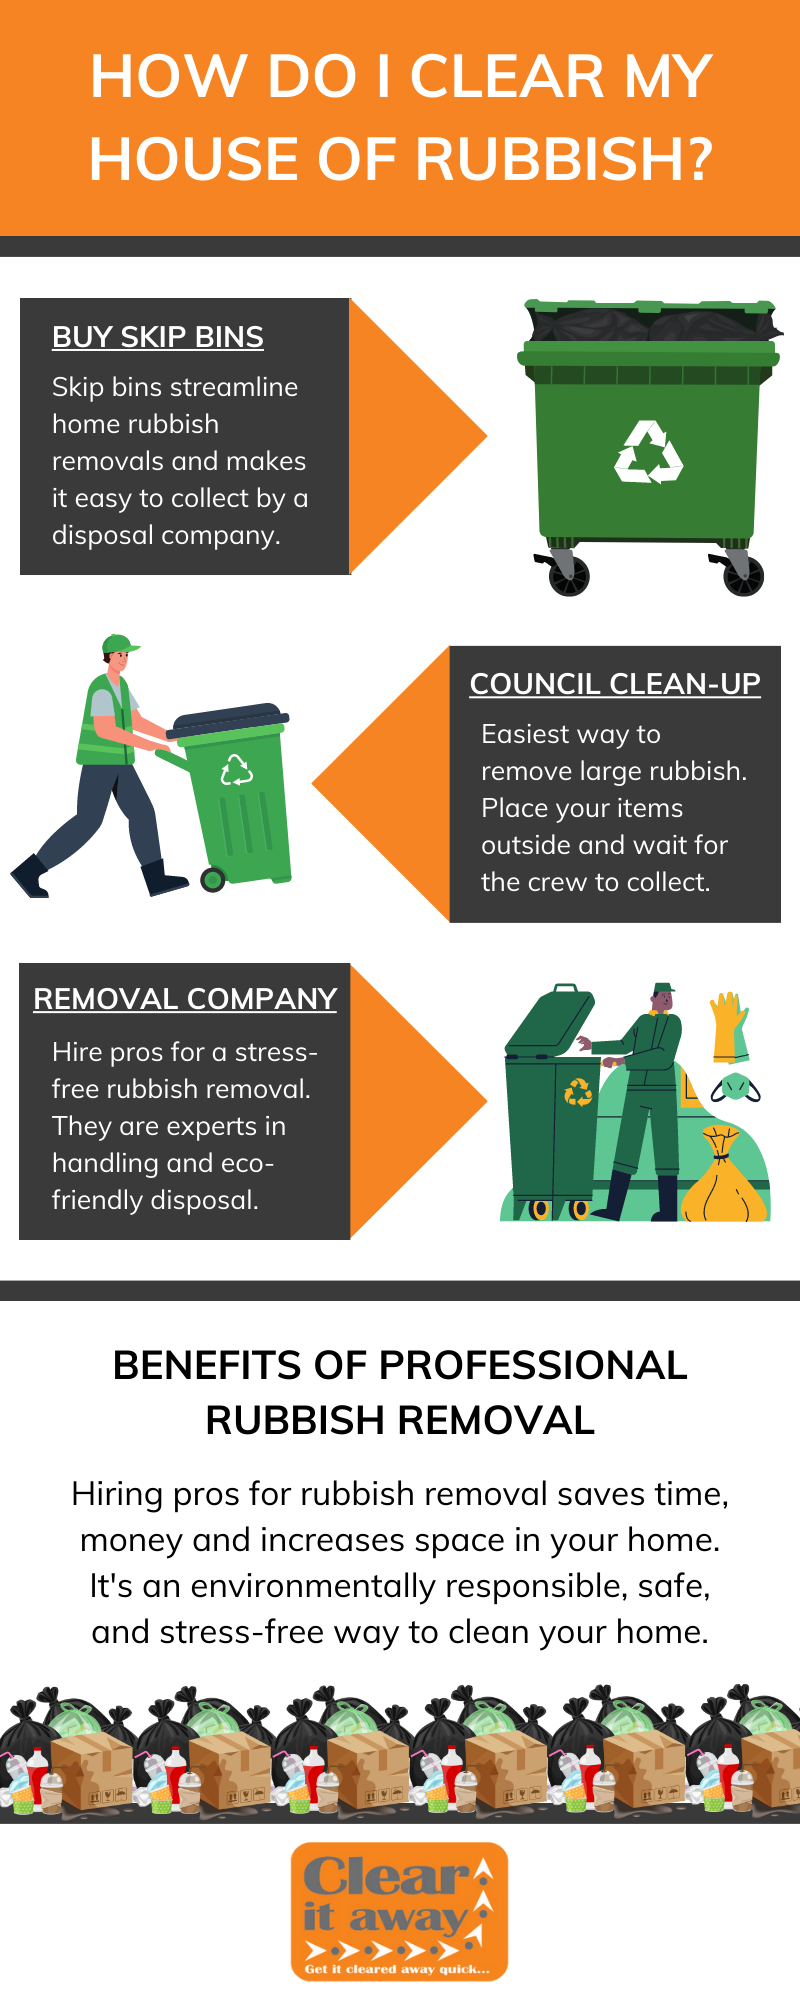 How Do I Clear My House Of Rubbish?